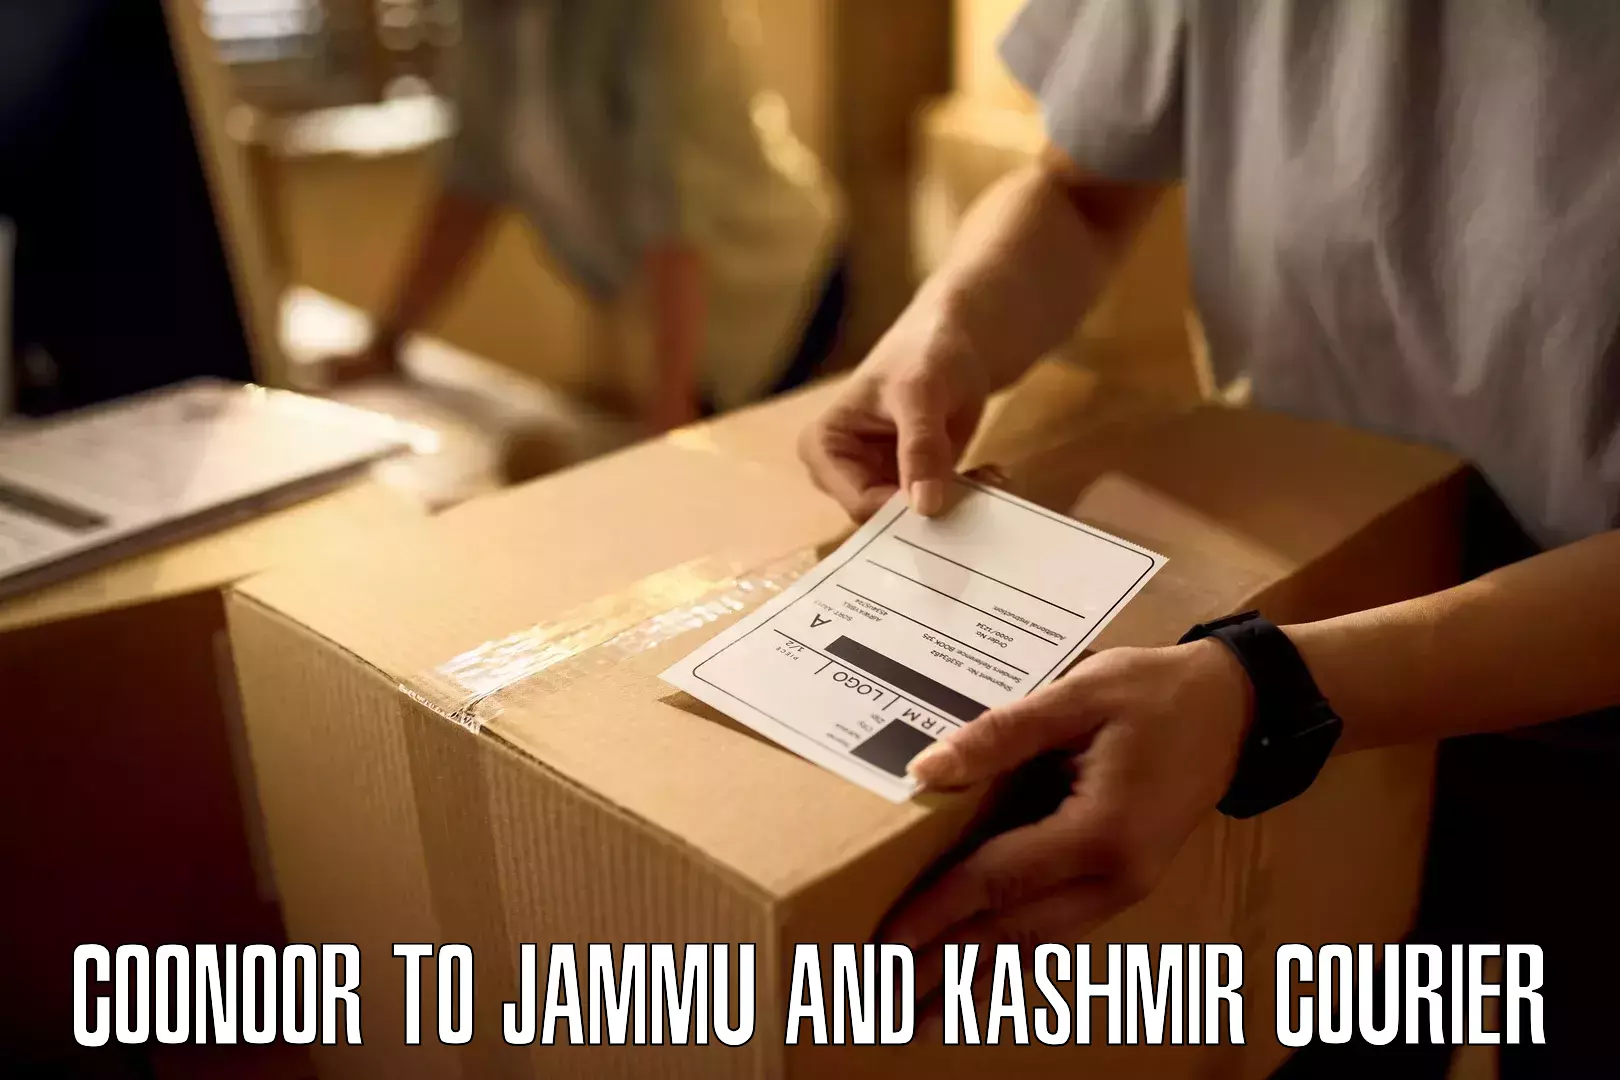 Professional courier handling Coonoor to Jammu and Kashmir